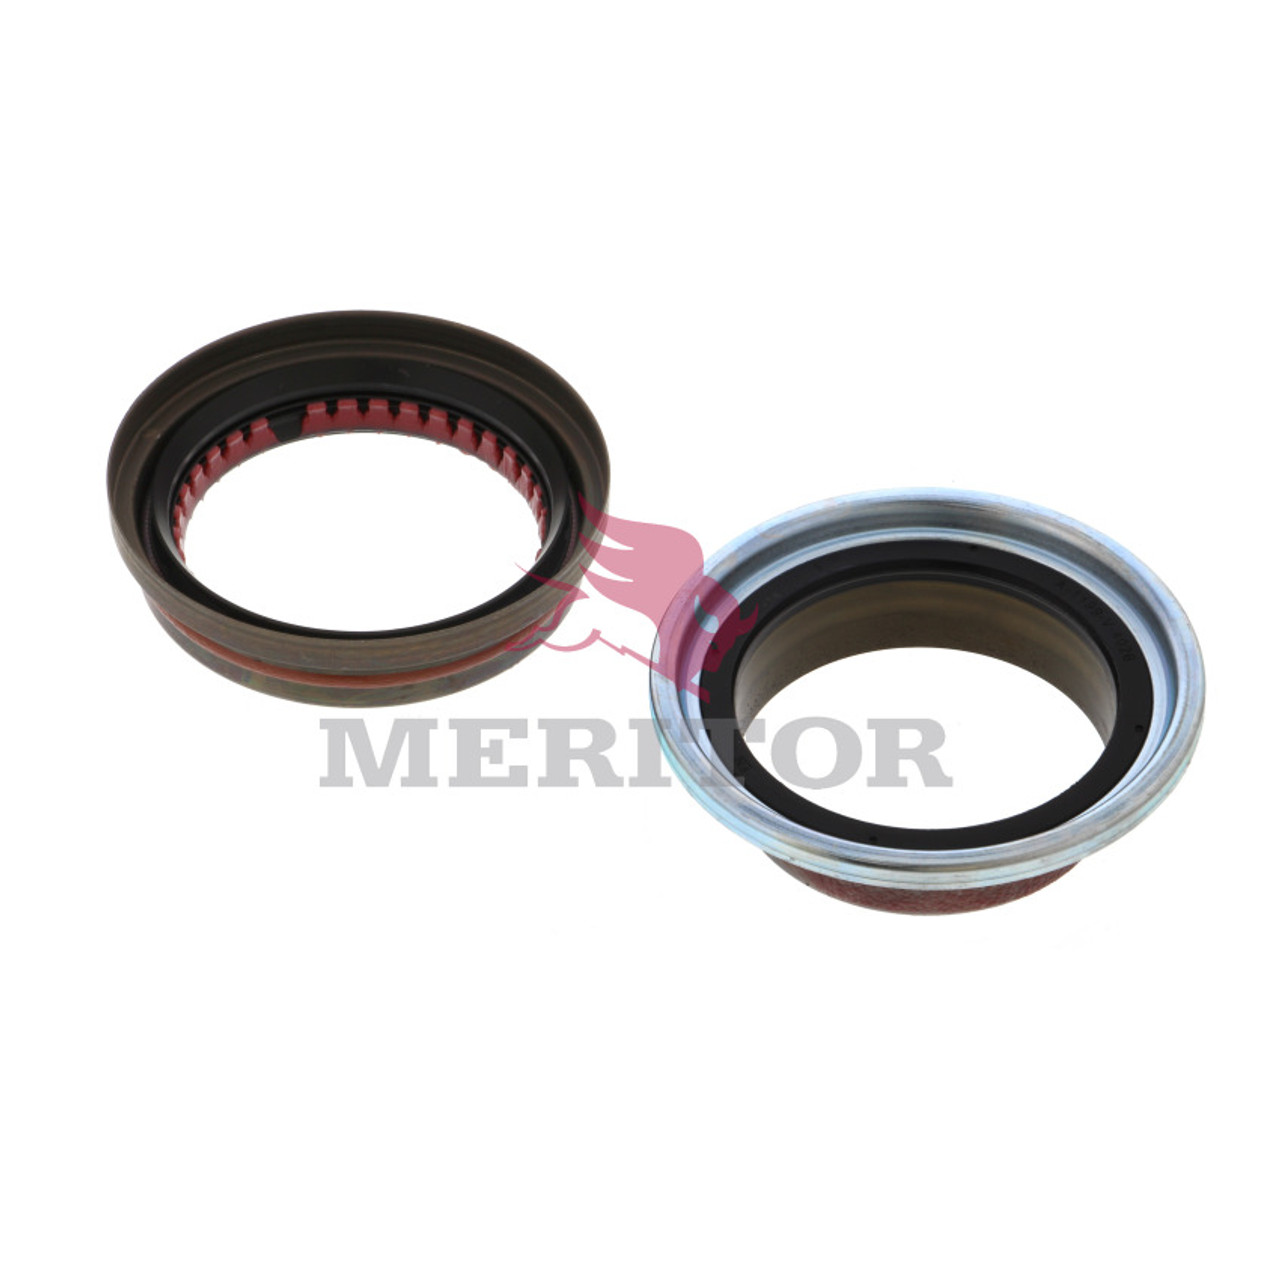 Meritor Front Rear Differential Output Seal Kit for Meritor 14x, 16x Series- A1 1205Y2729 *Genuine Meritor*